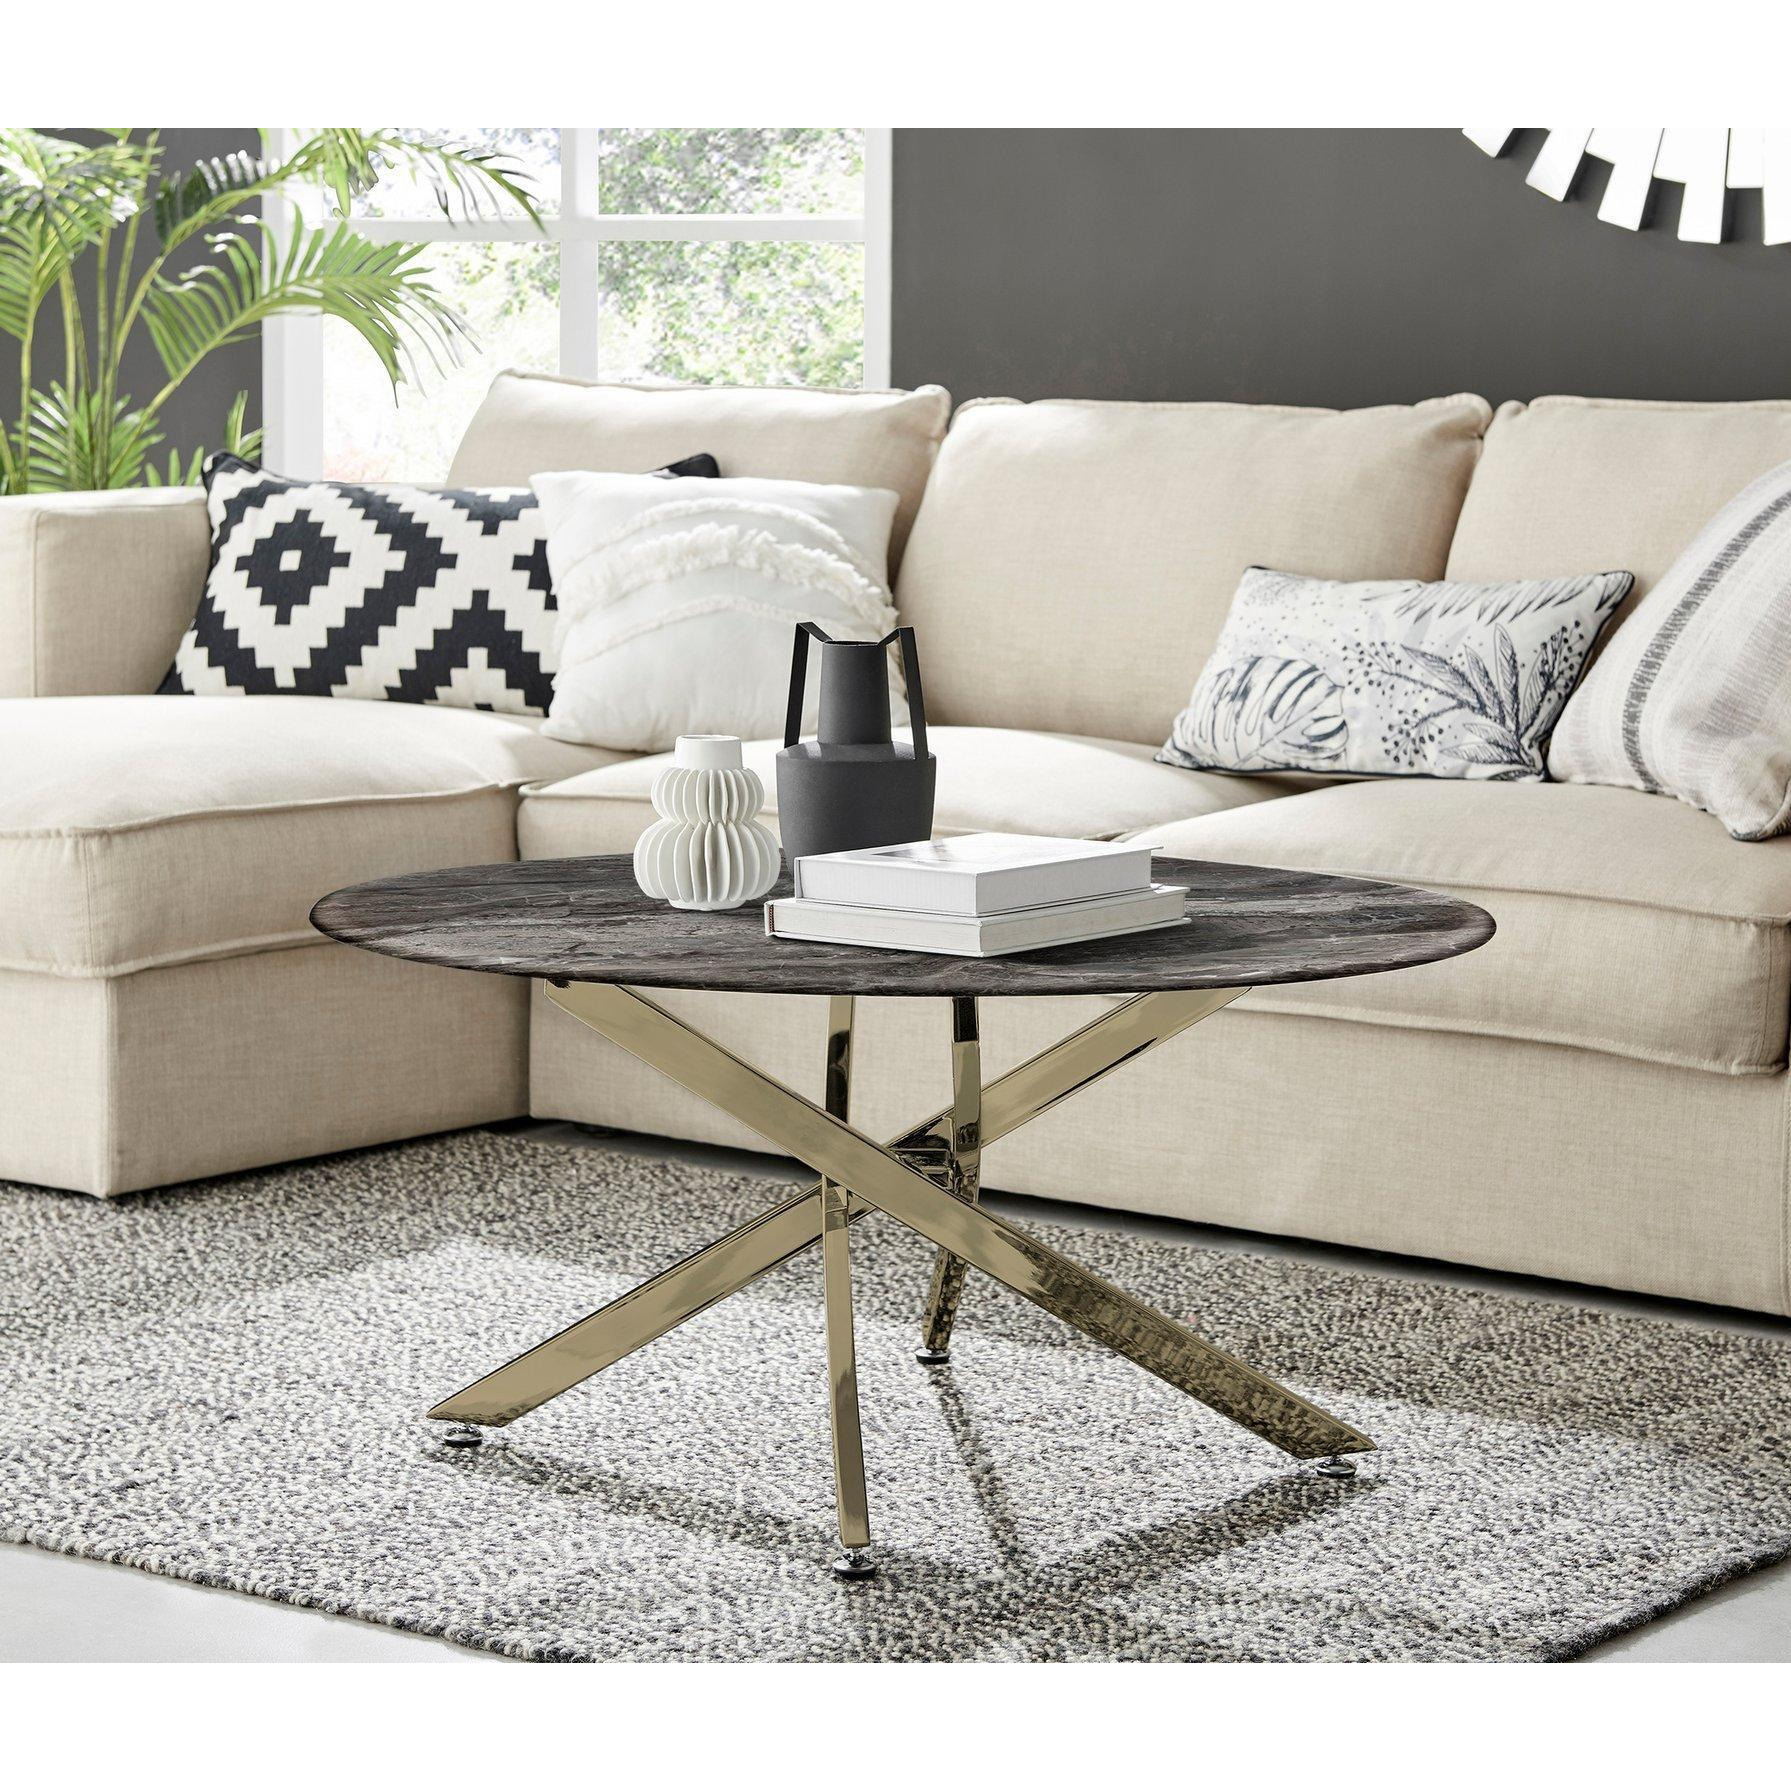 Novara Round Marble Effect Glass Top Coffee Table With Gold Metal Starburst Legs - image 1